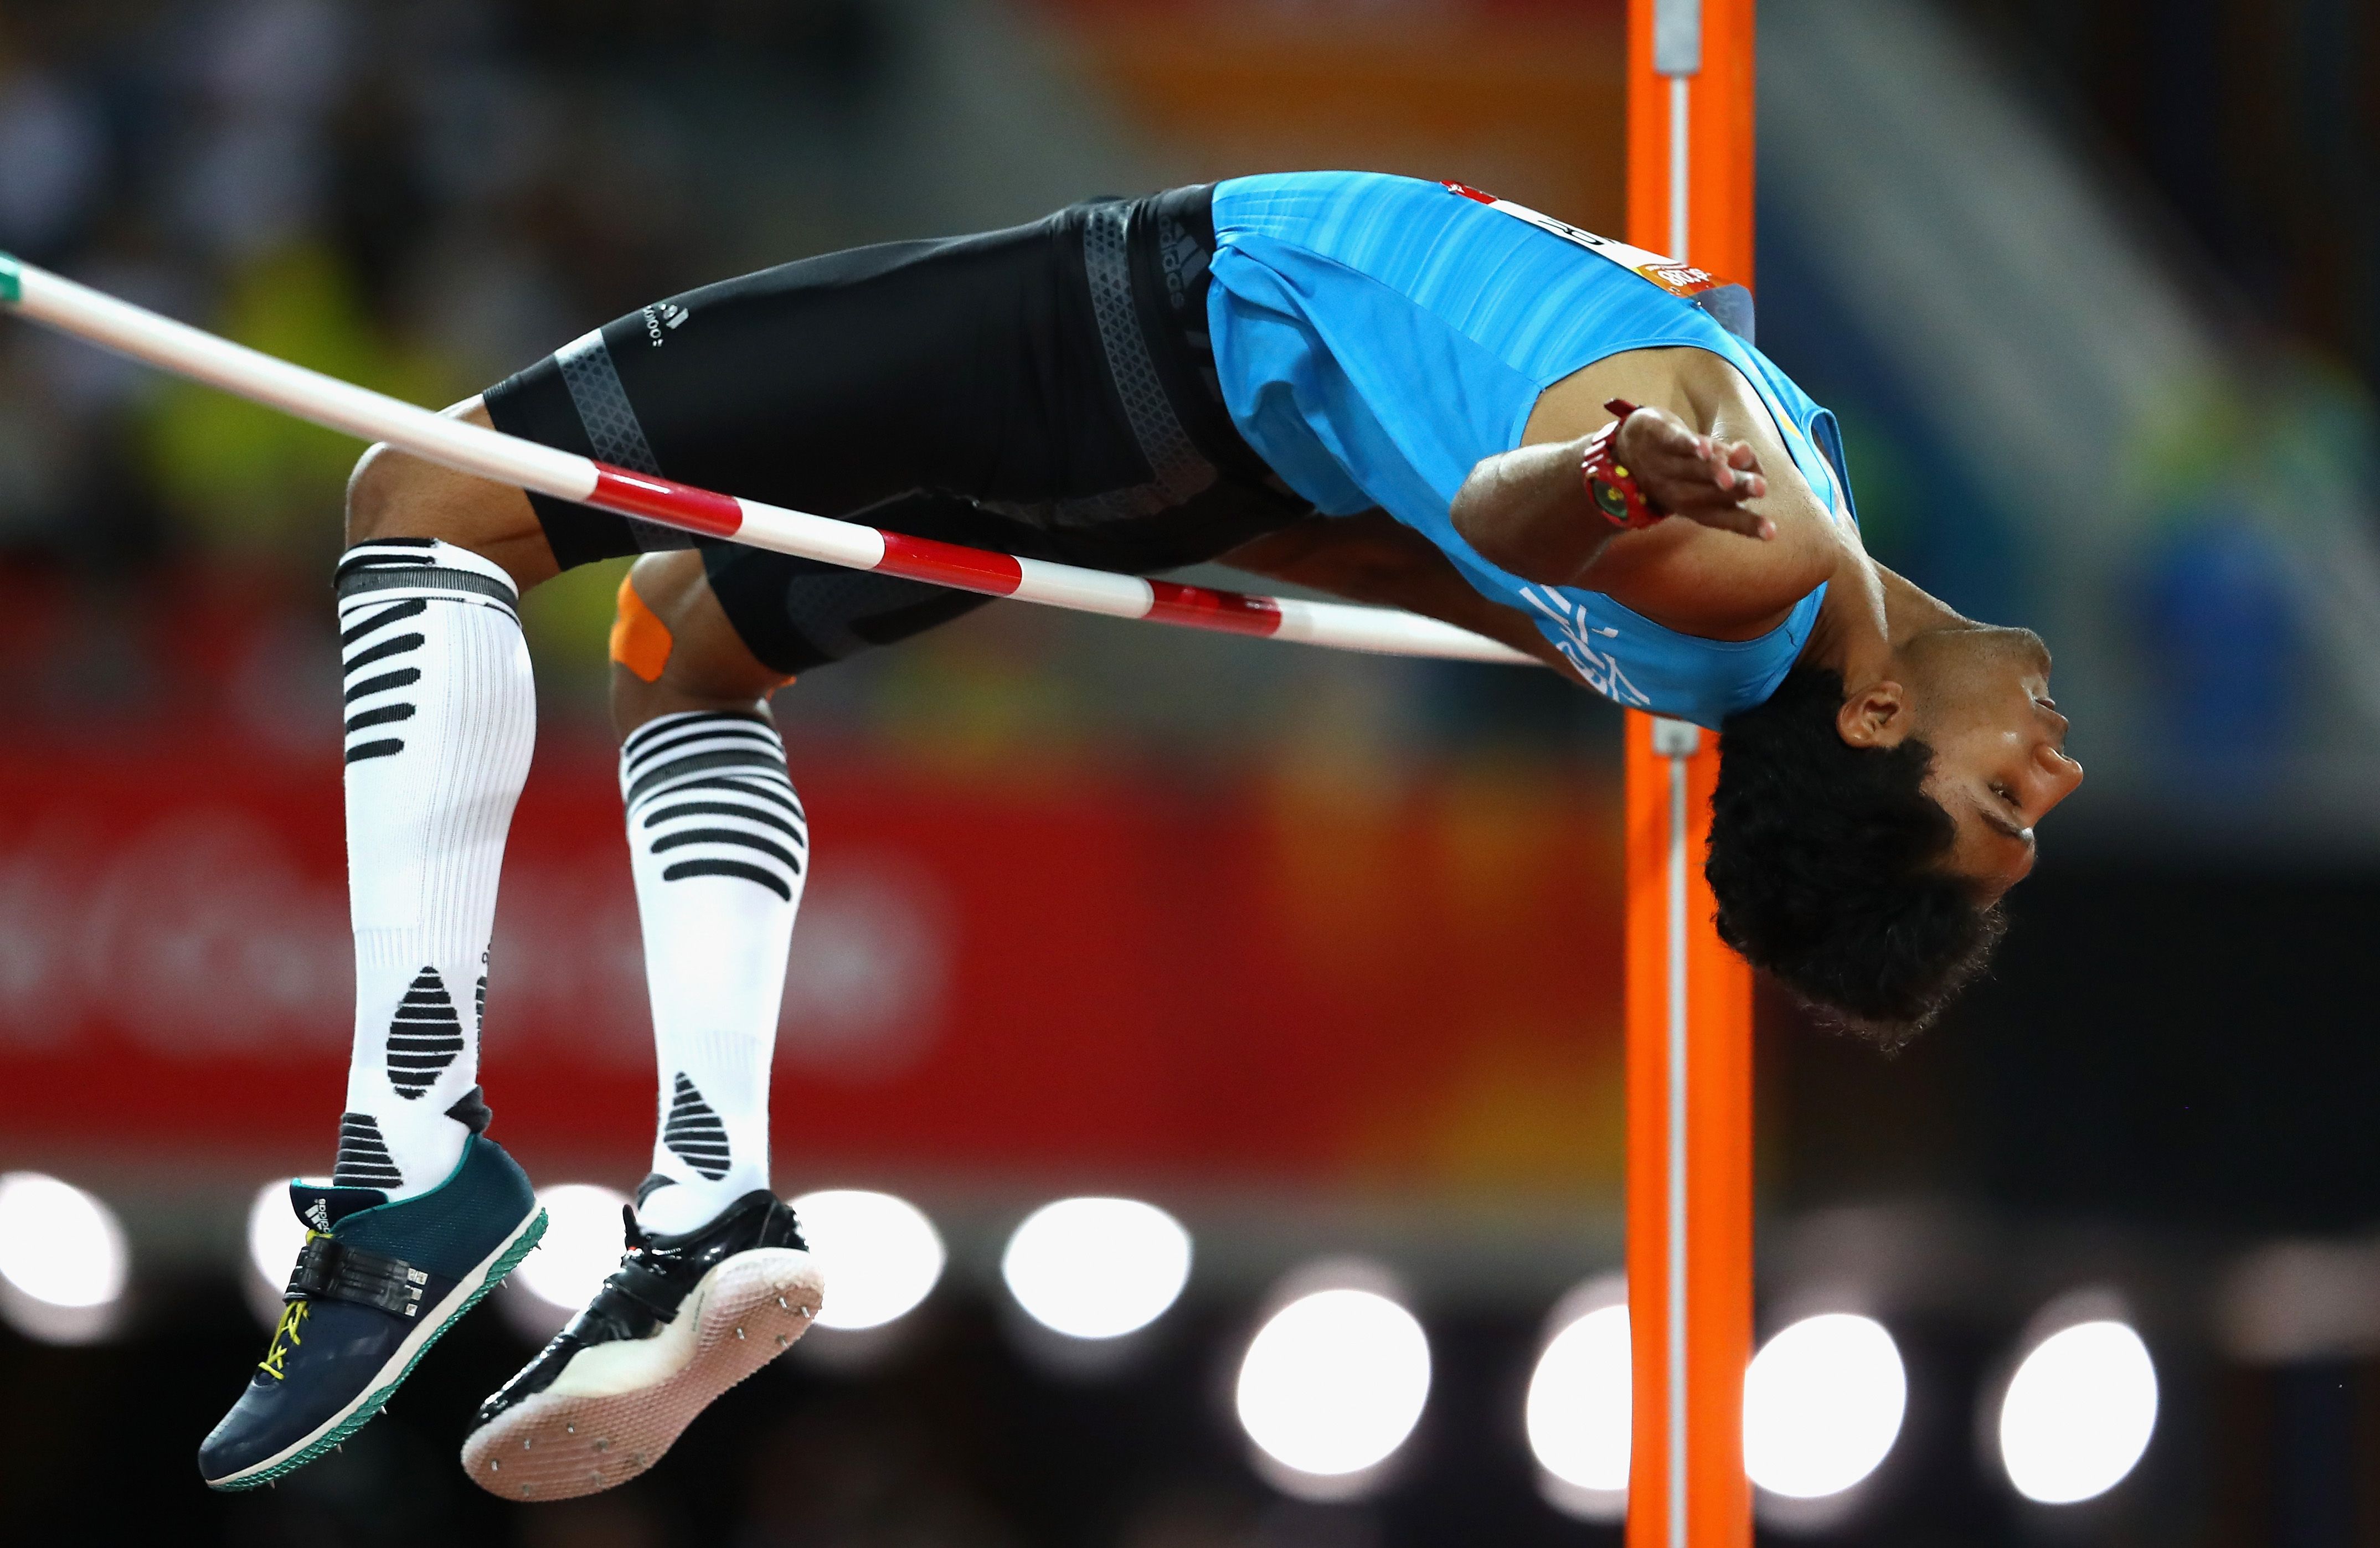 AFI under fire after high jumper Tejaswin Shankar objects to President’s comment